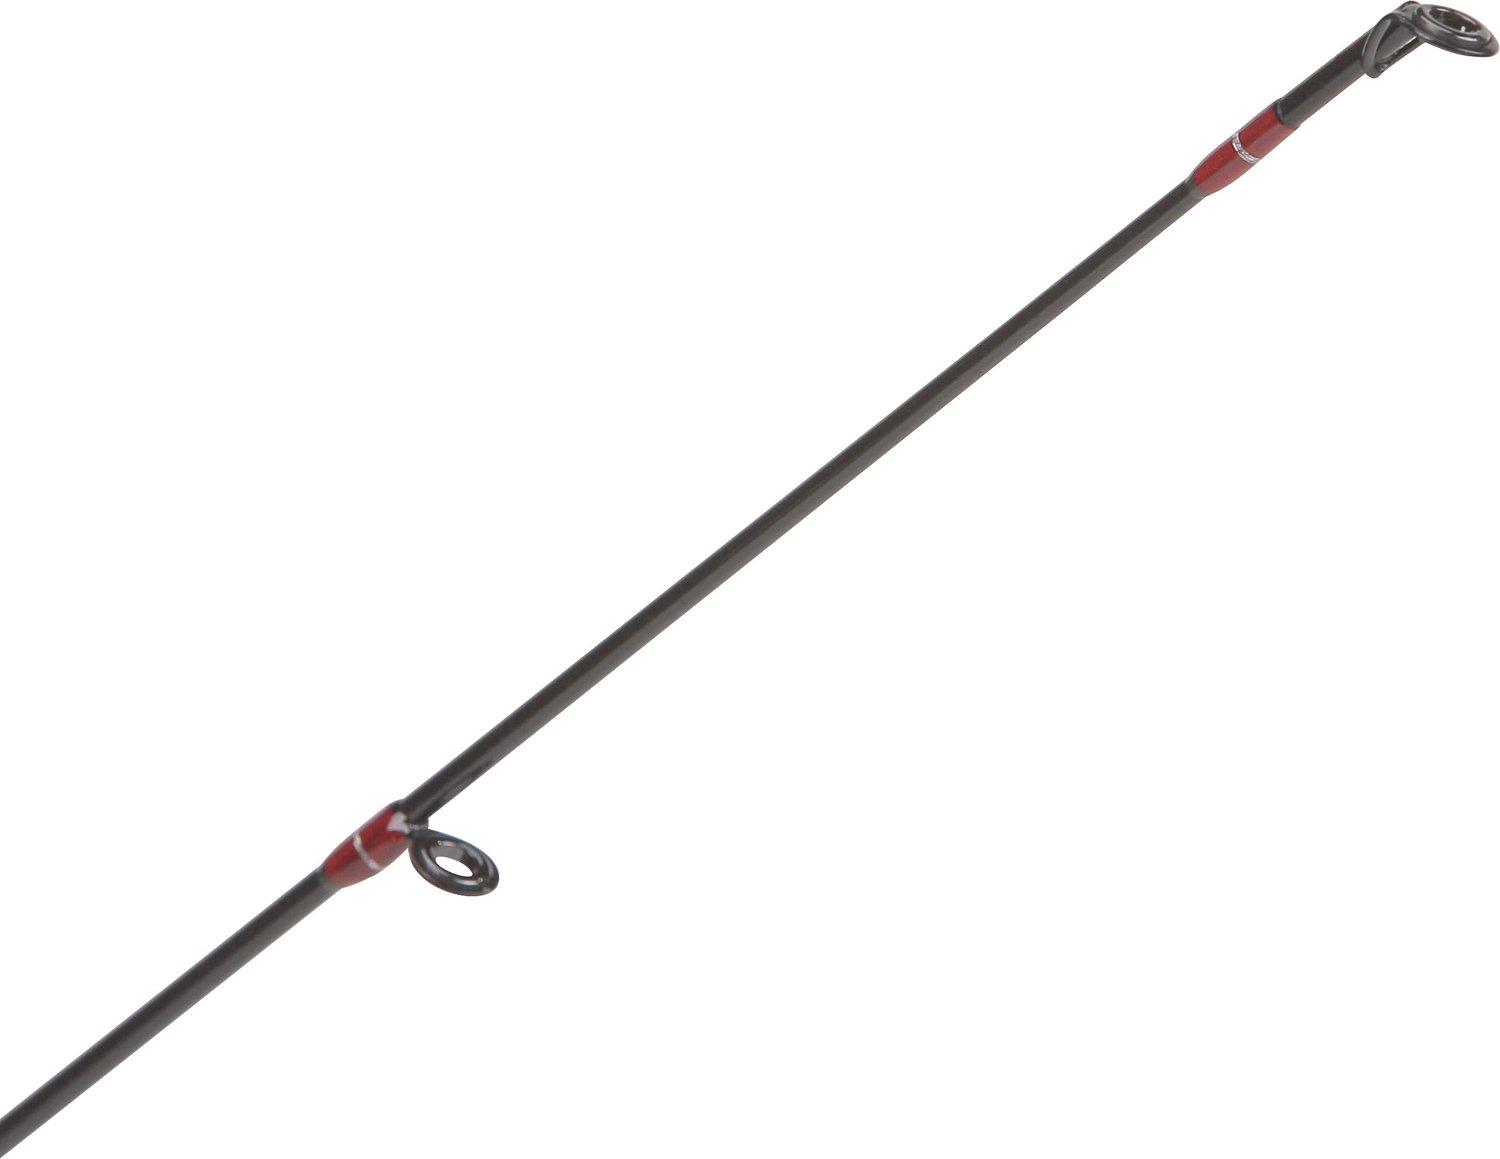 Academy Sports + Outdoors All Star Rods Team 3 Spinning Rod